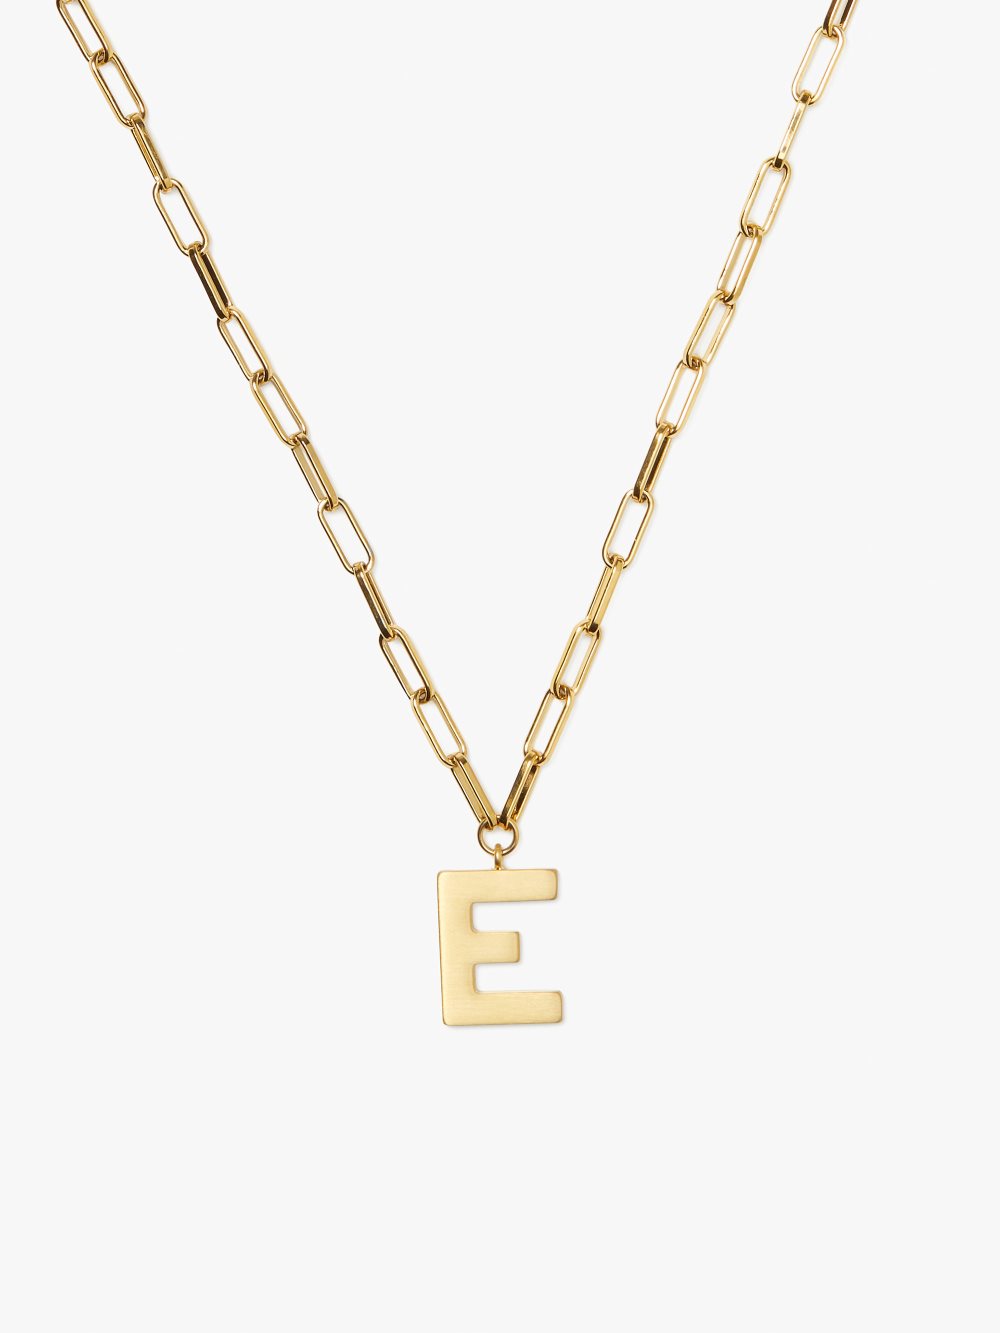 Women's gold. e initial this pendant | Kate Spade